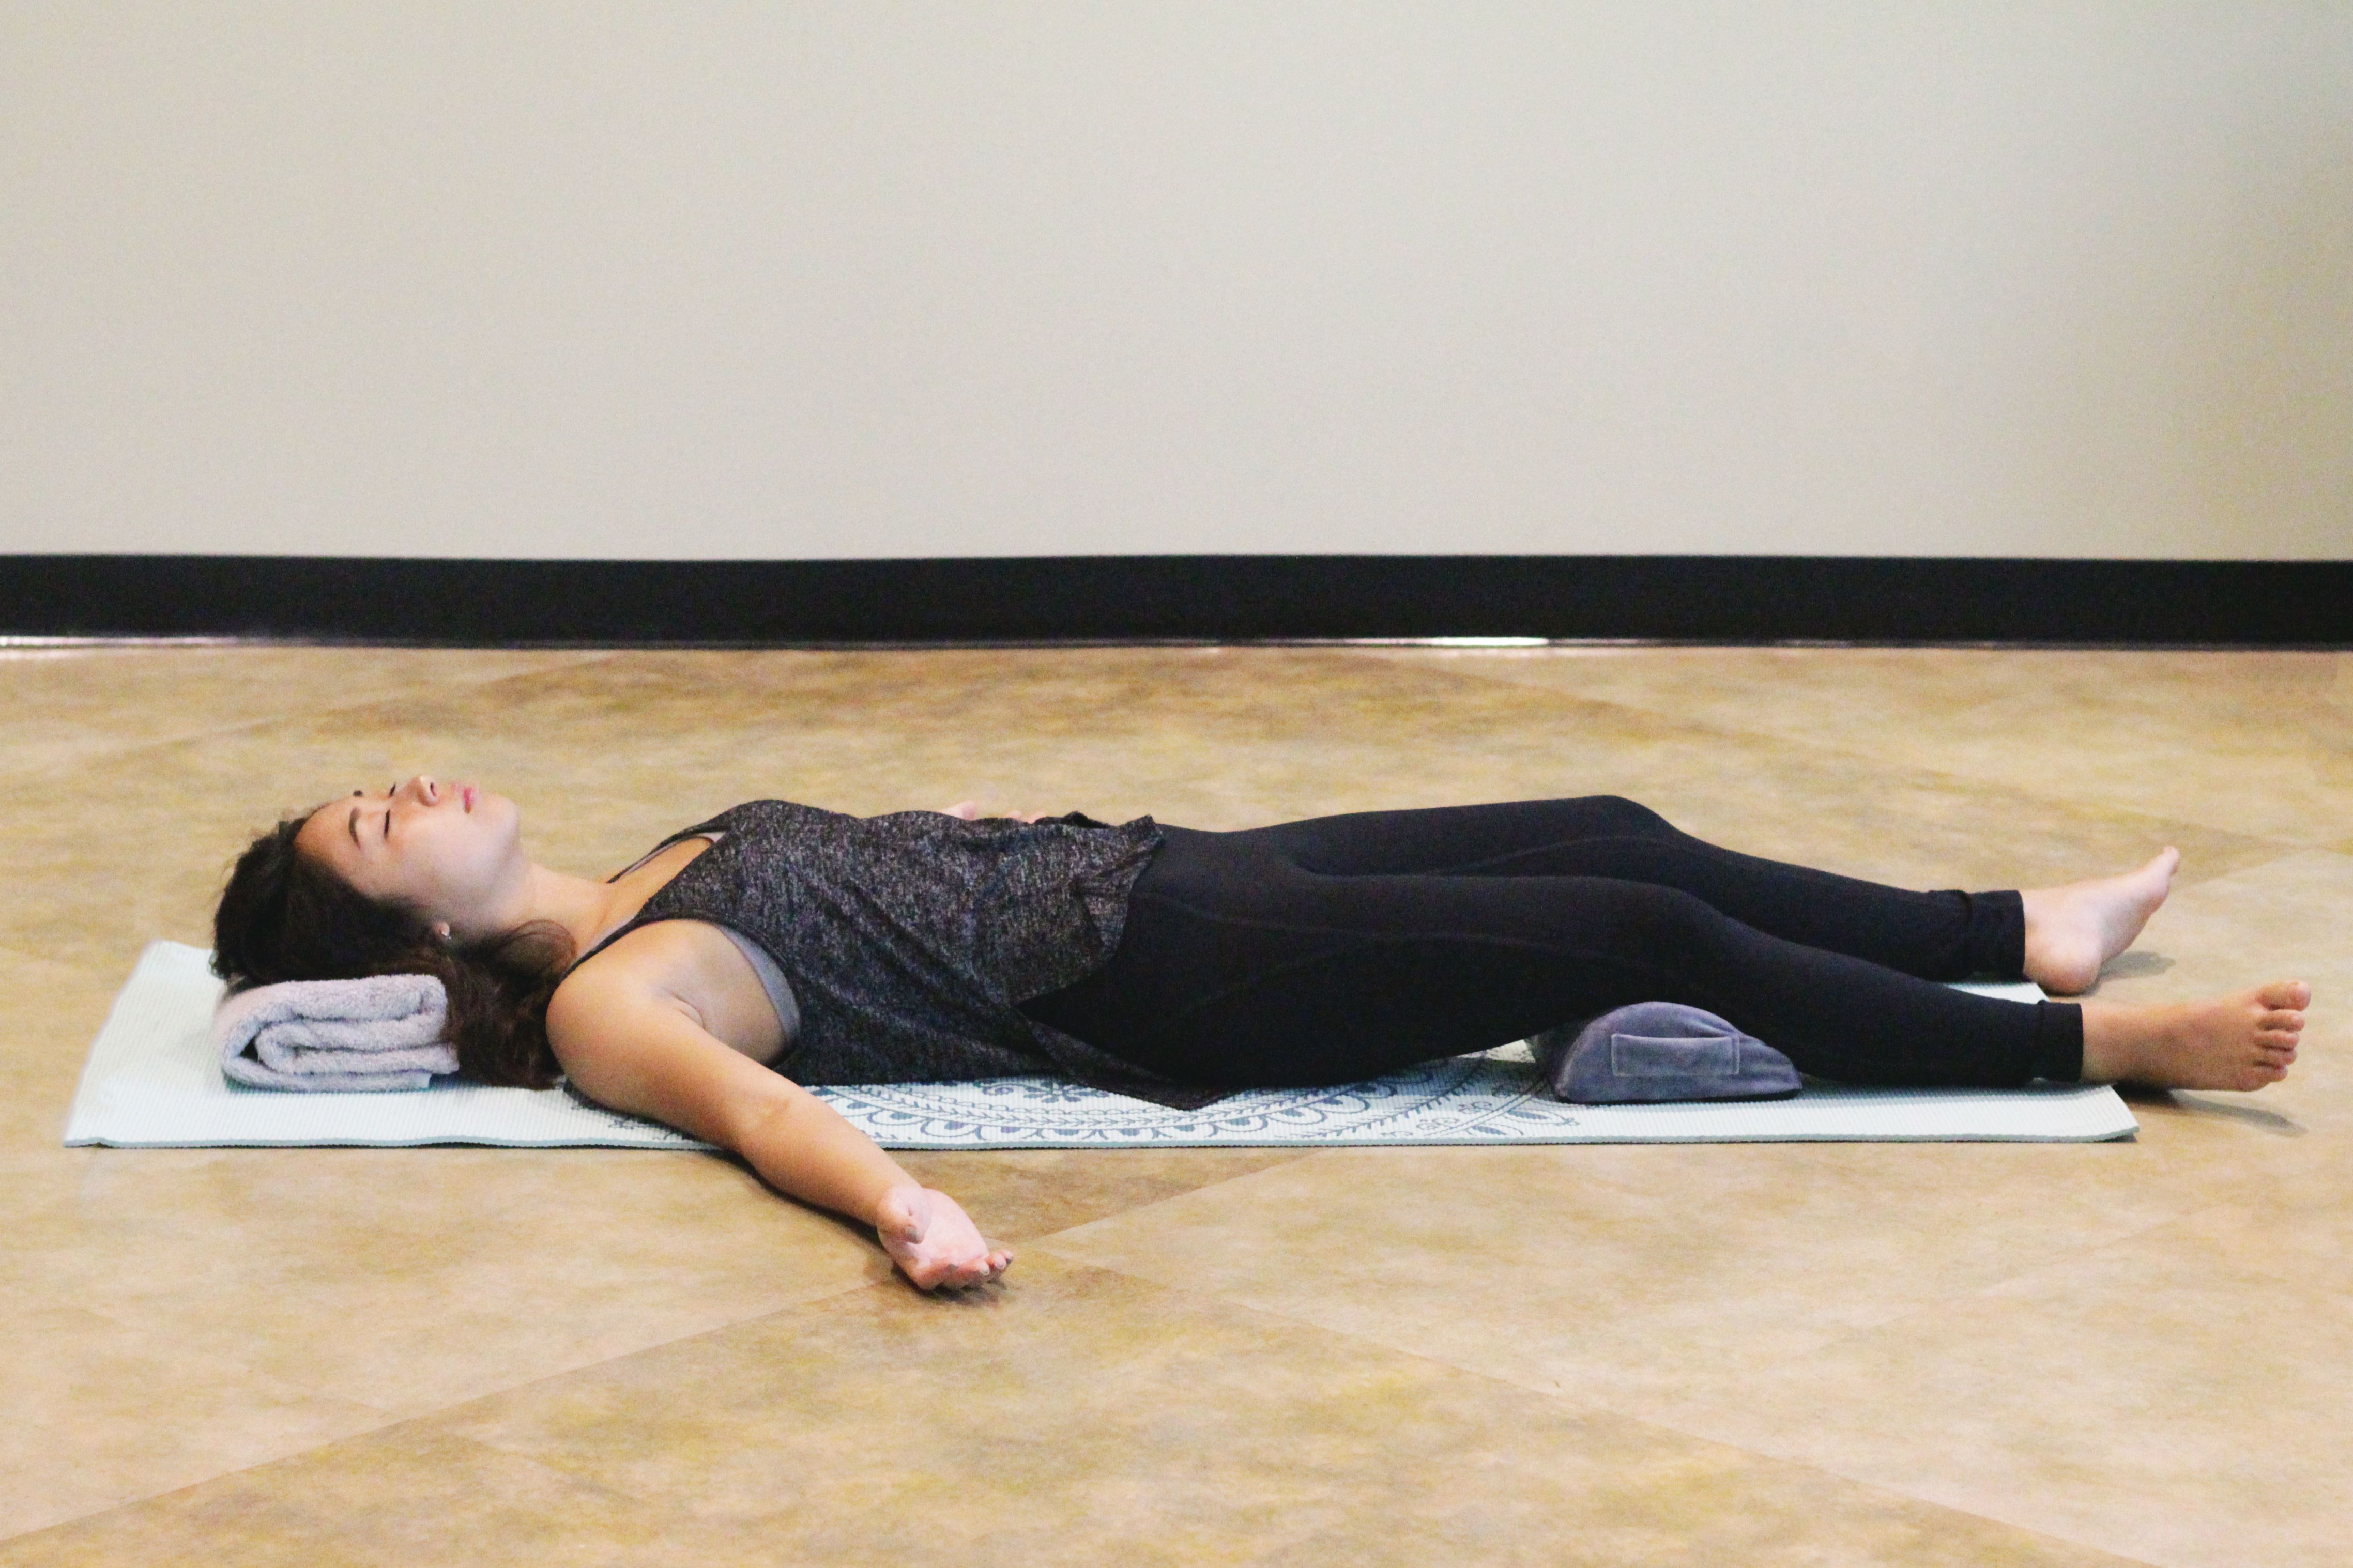 Rest, relax, and enjoy during the final resting post of Savasana in this restorative yoga flow.